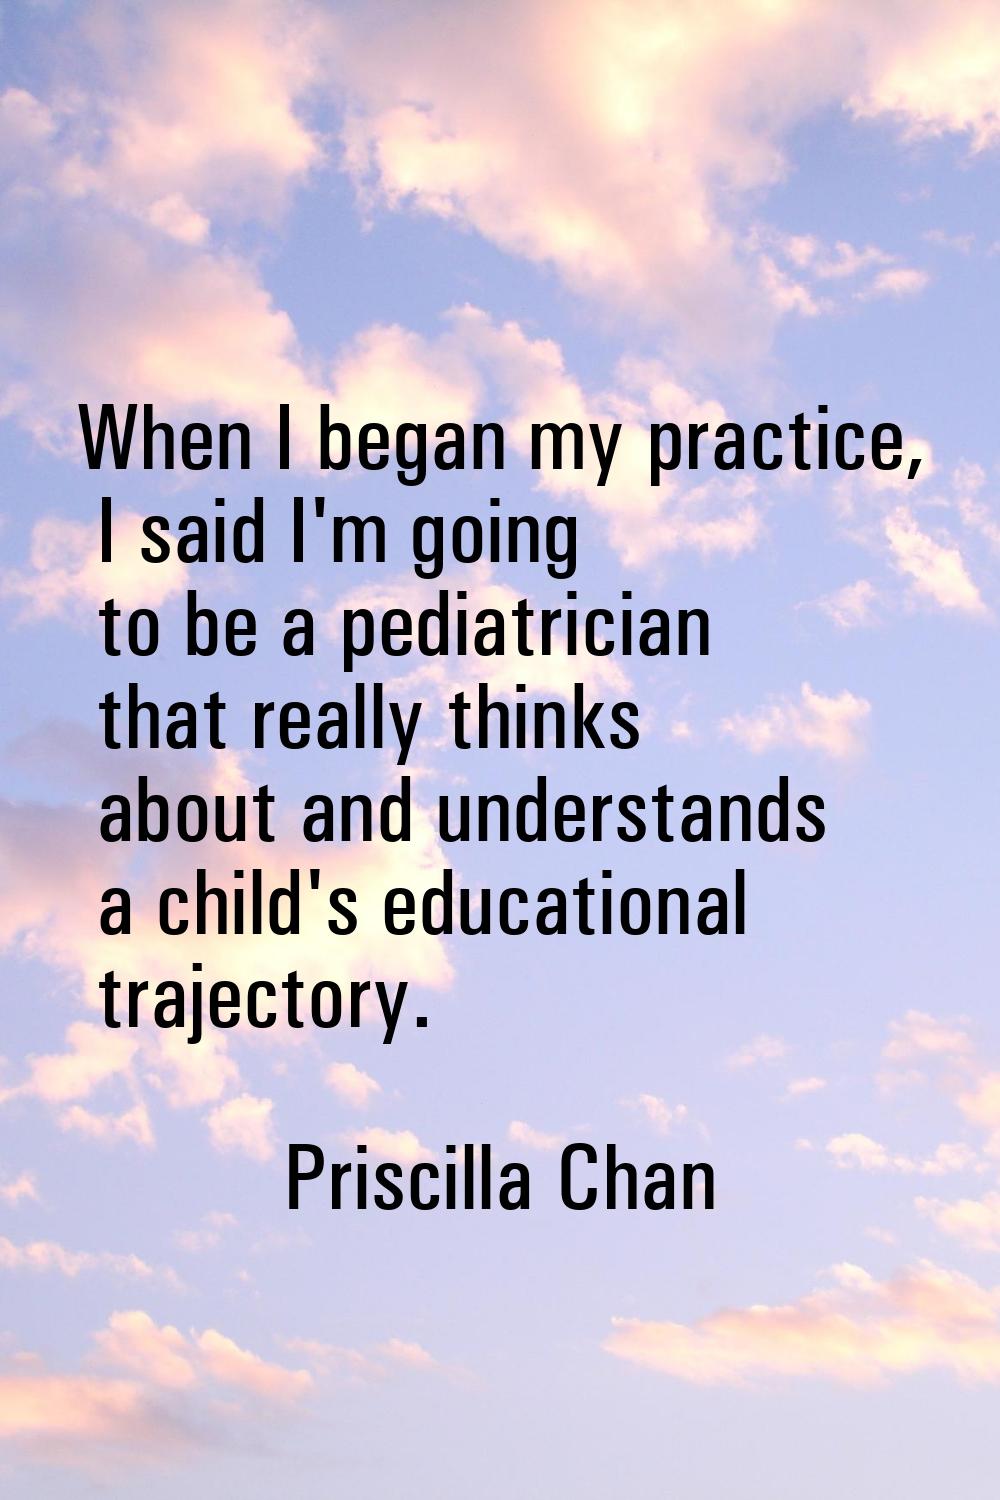 When I began my practice, I said I'm going to be a pediatrician that really thinks about and unders